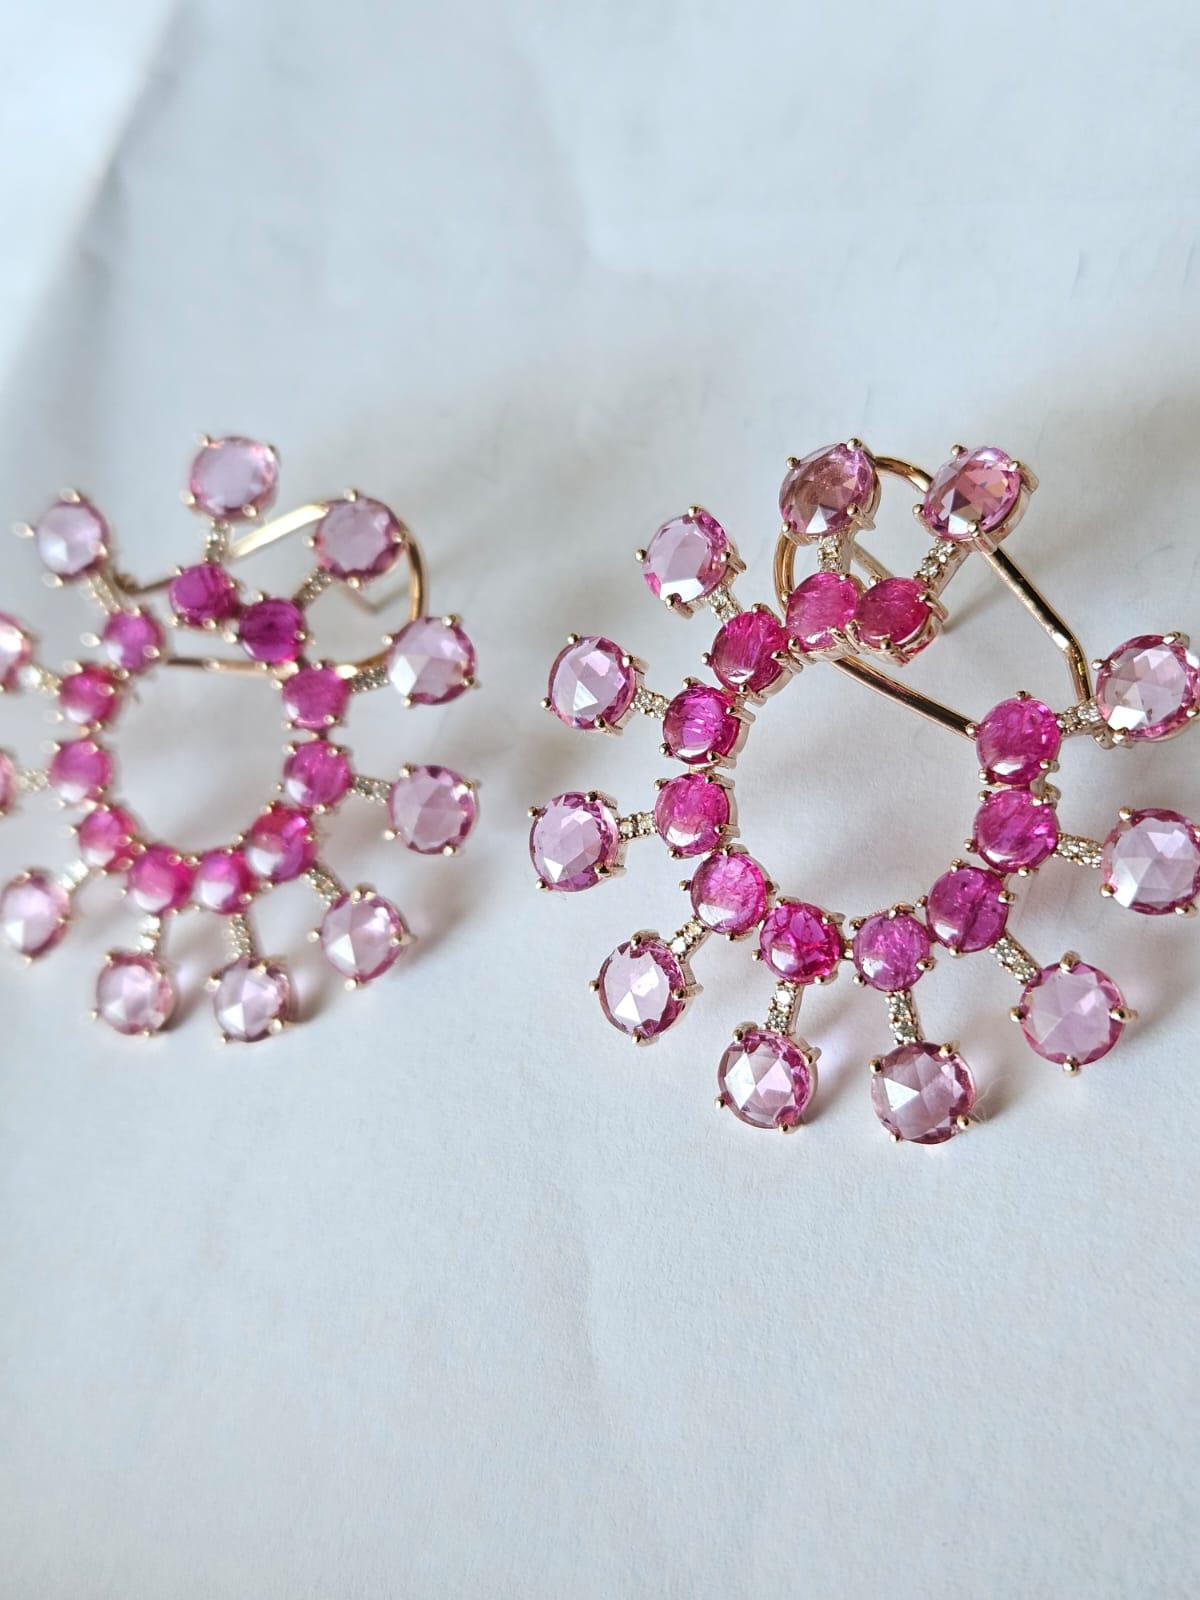 A very gorgeous and beautiful, modern style, Pink Sapphire & Ruby Stud/ Hoop Earrings set in 18K Rose Gold & Diamonds. The weight of the Pink Sapphire Rose Cuts is 9.05 carats. The Pink Sapphires are of Ceylon (Sri Lankan) origin. The weight of the